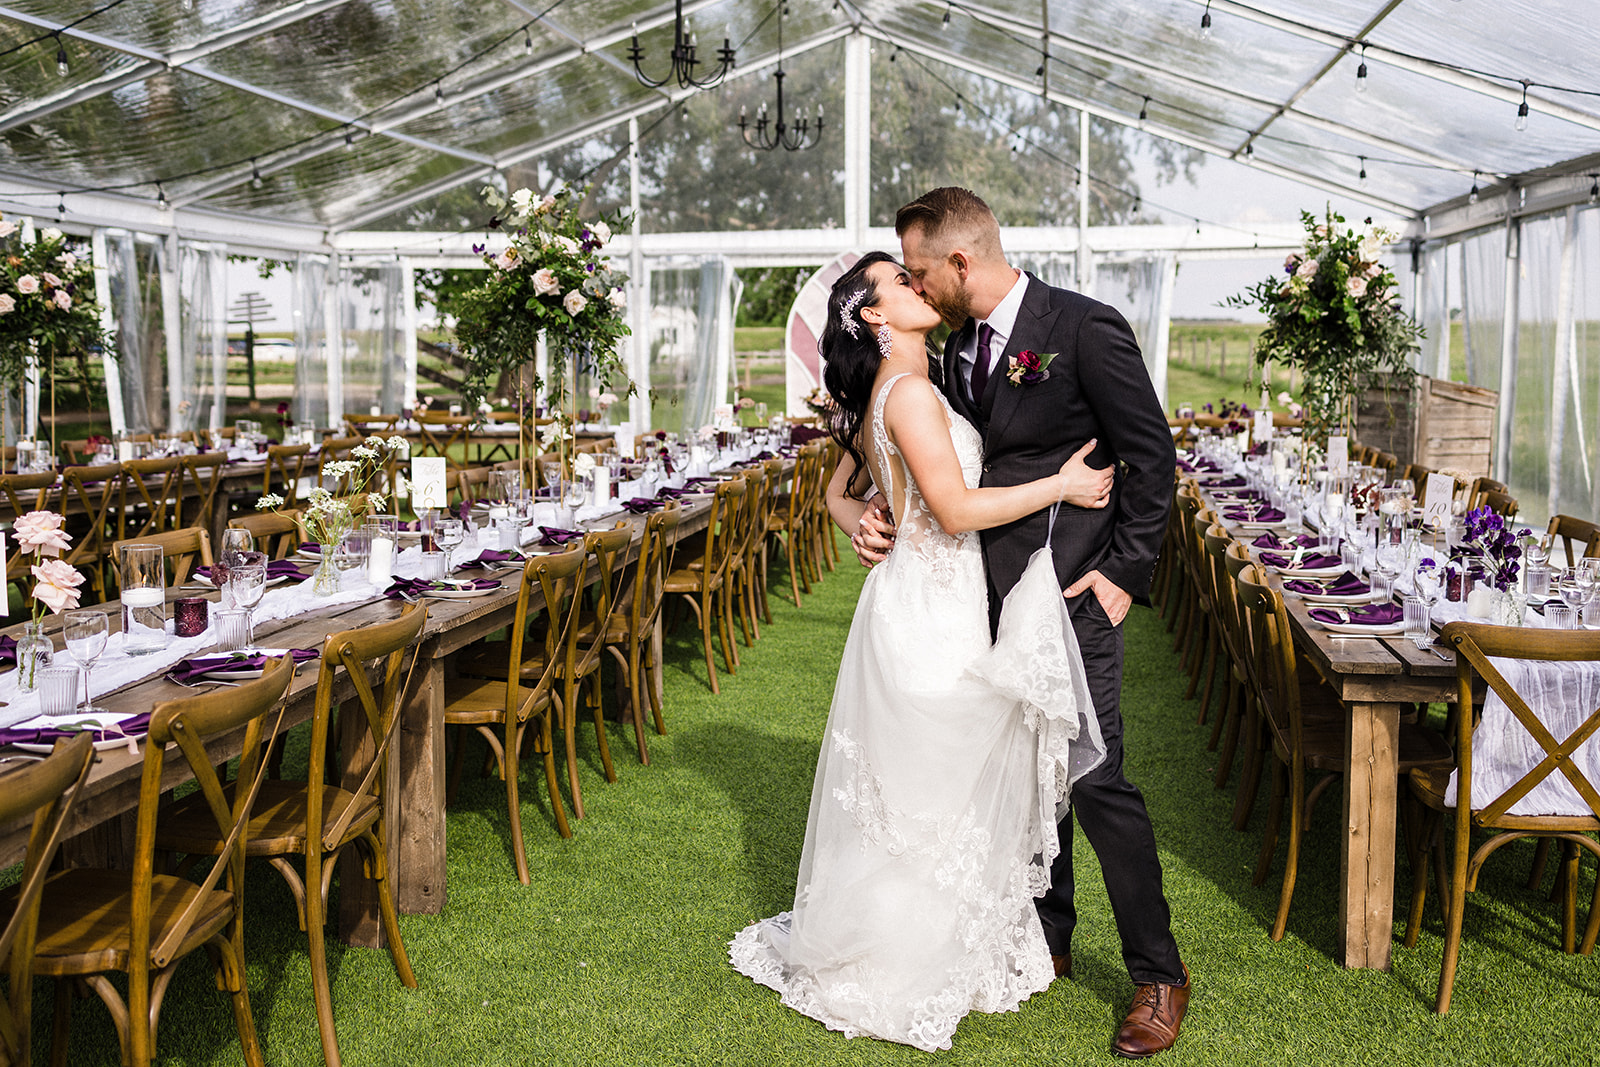 Bride and groom sharing a kiss inside a glasshouse wedding venue decorated with flowers and set tables.